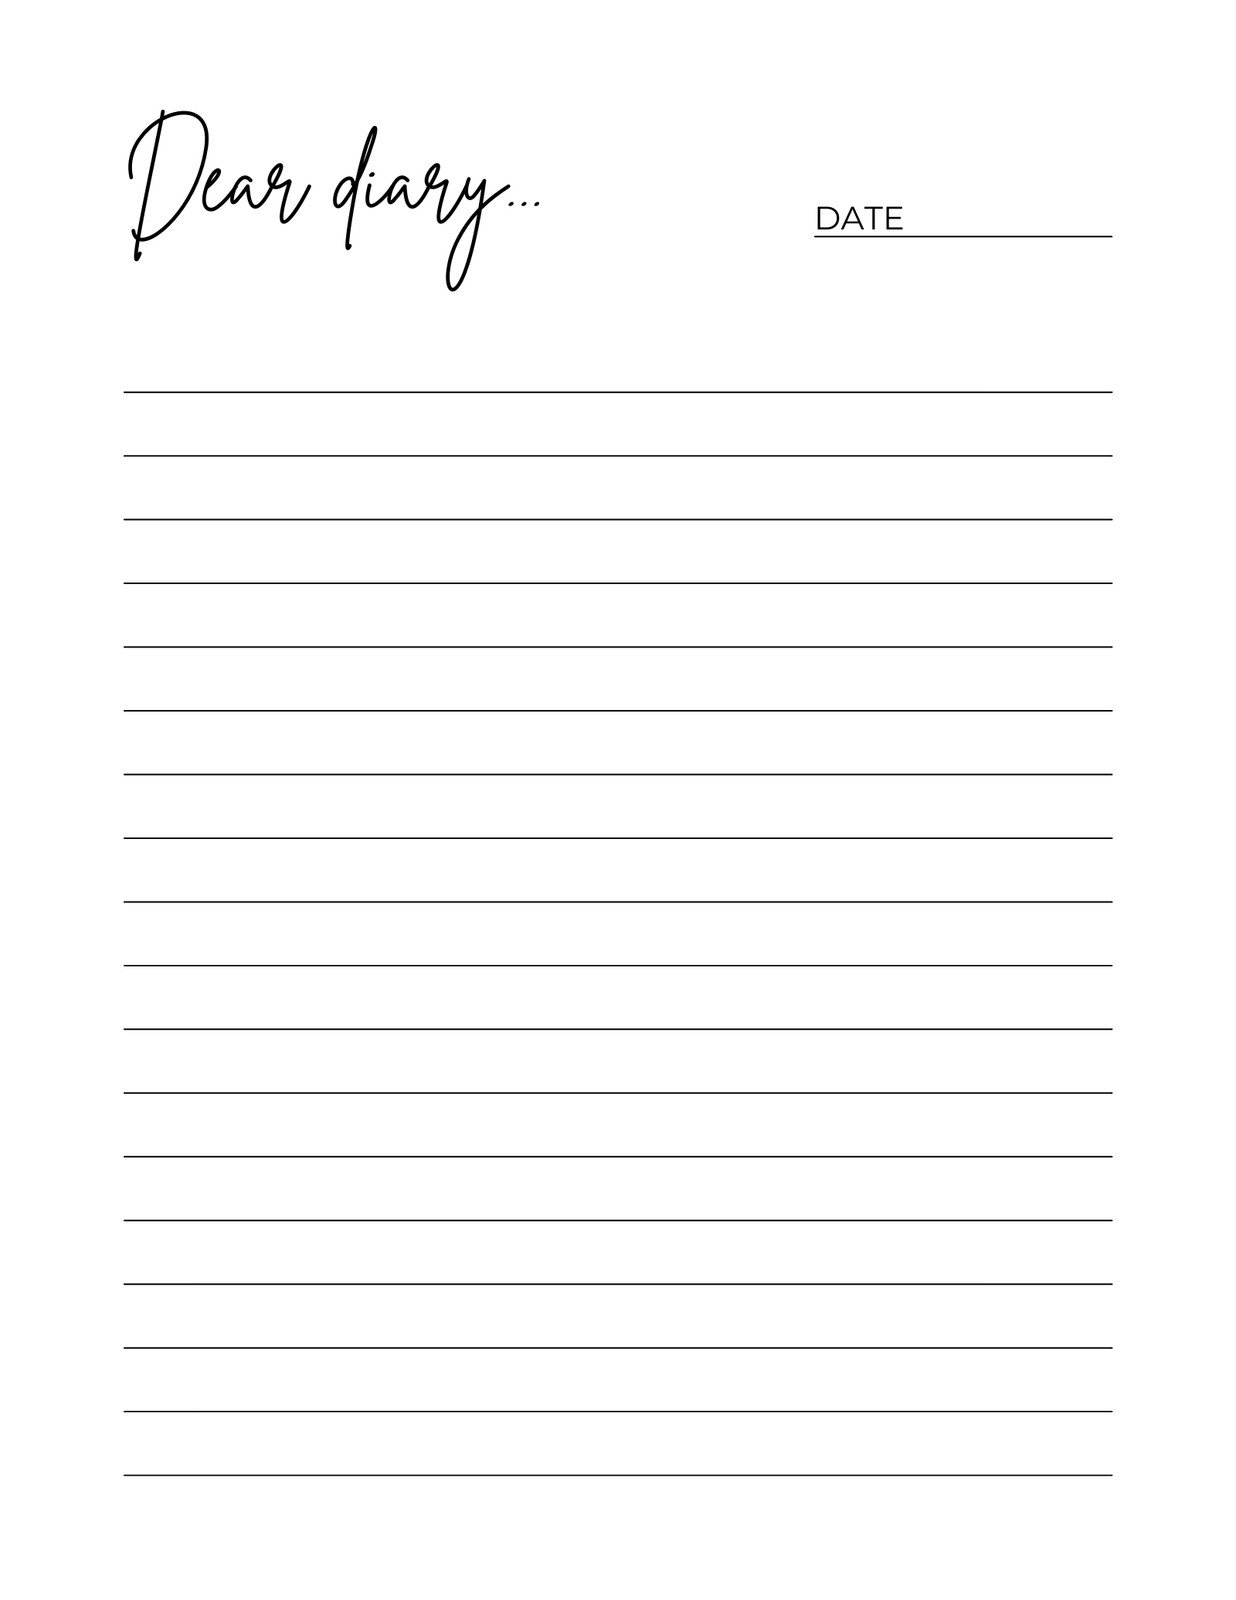 Journal Templates - Make Your Own Journal  Journal template, Writing paper  printable, Printable lined paper